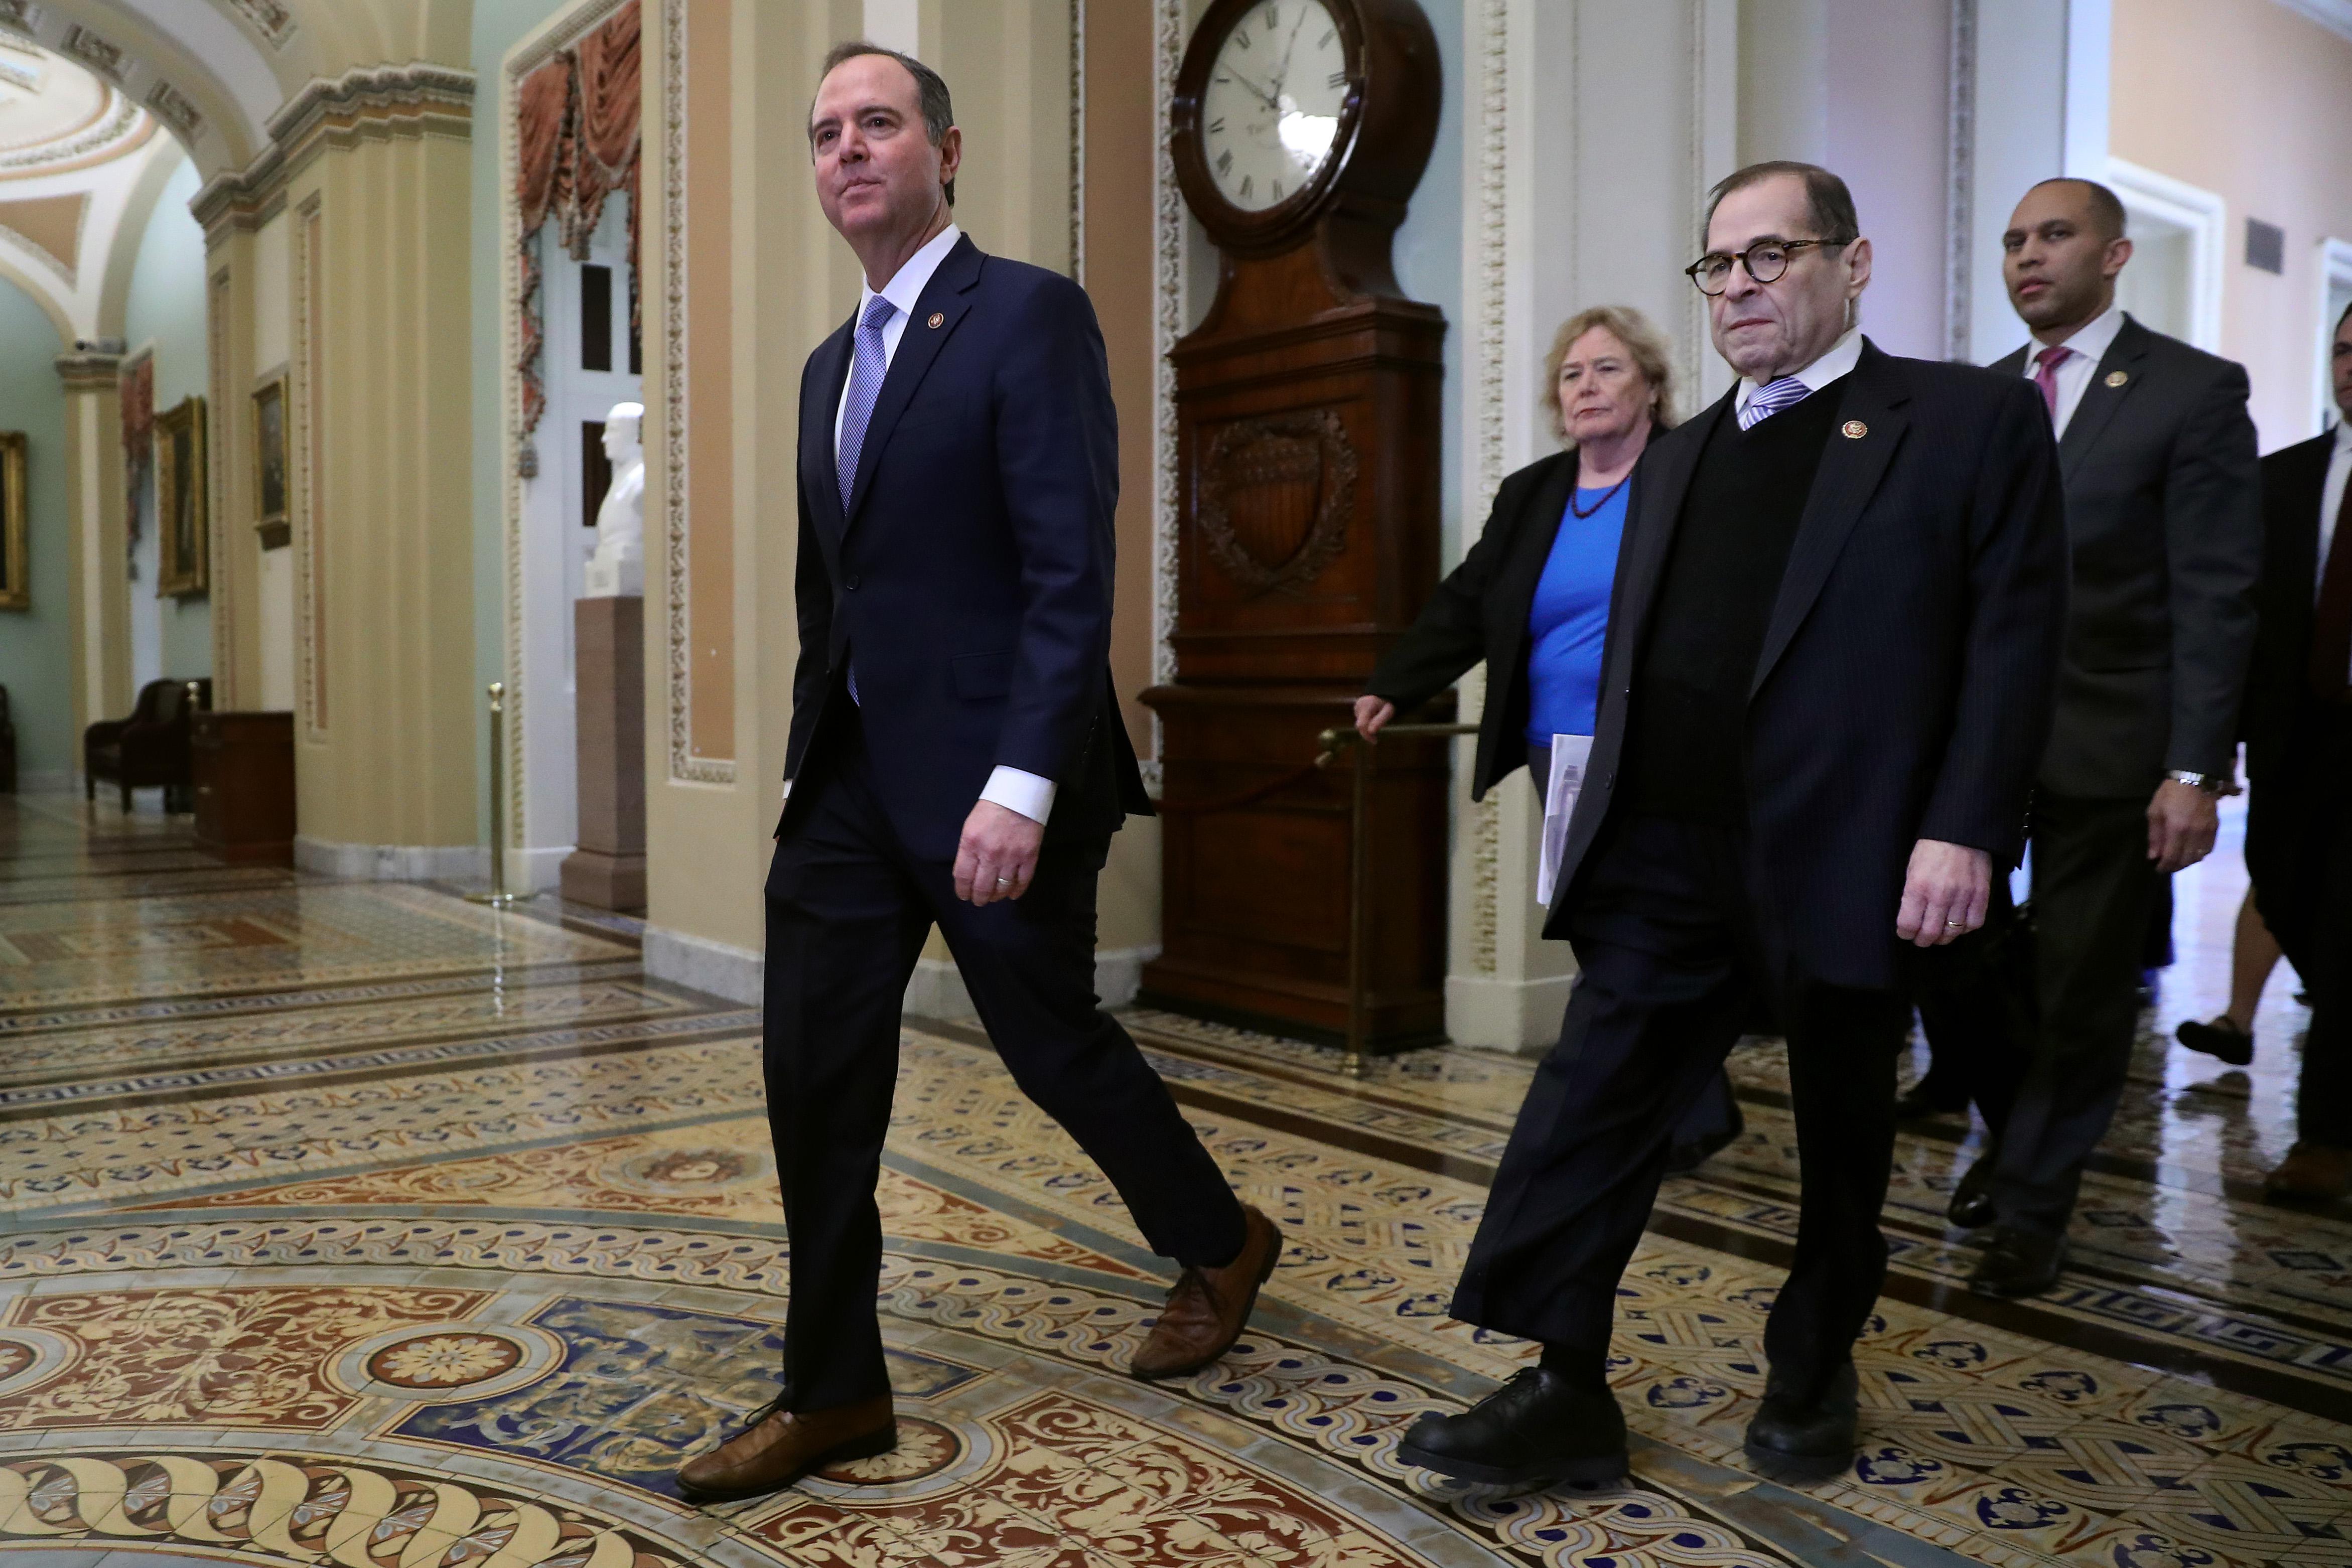 Rep. Adam Schiff (D-CA) strides across the Capitol floor outside the Senate chamber, followed by Rep. Zoe Lofgren (D-CA), Rep. Jerrold Nadler (D-NY) and Rep. Hakeem Jeffries (D-NY).